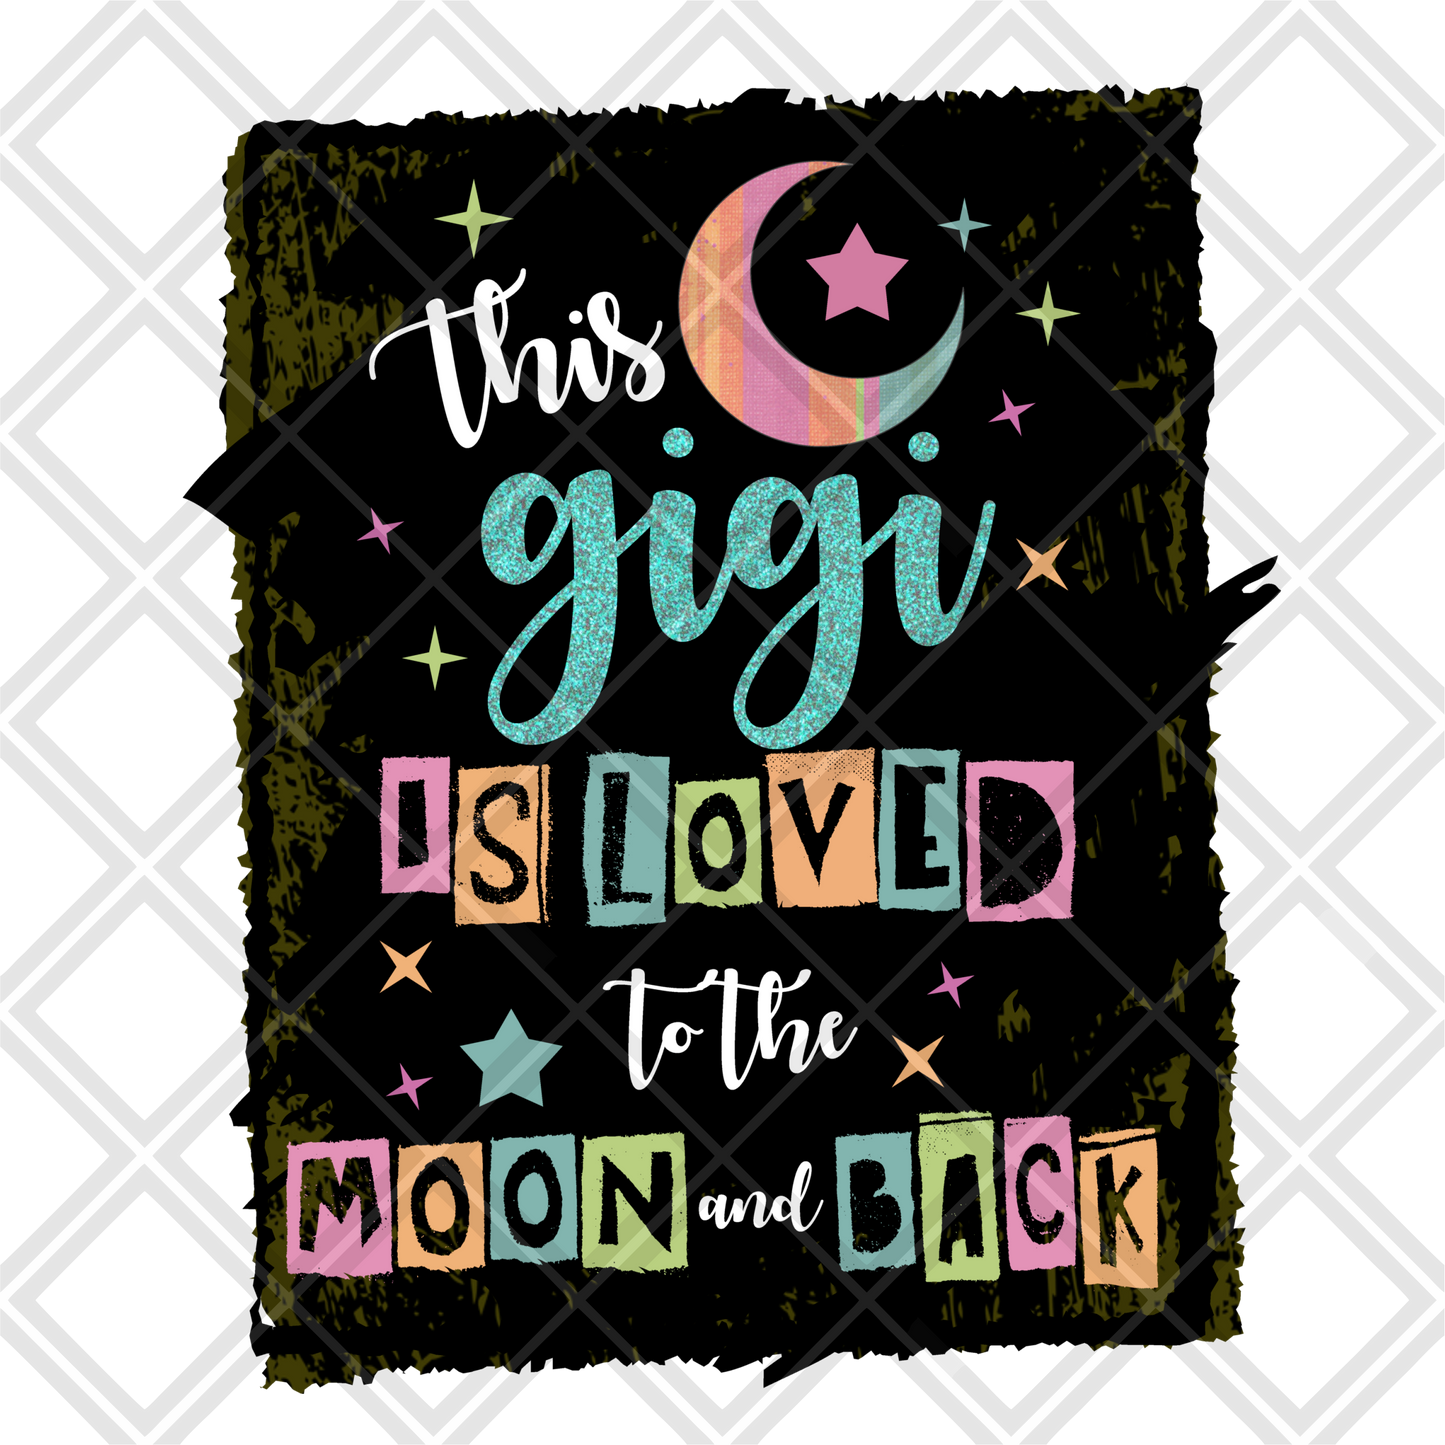 This gigi is loved to the moon and back DTF TRANSFERPRINT TO ORDER